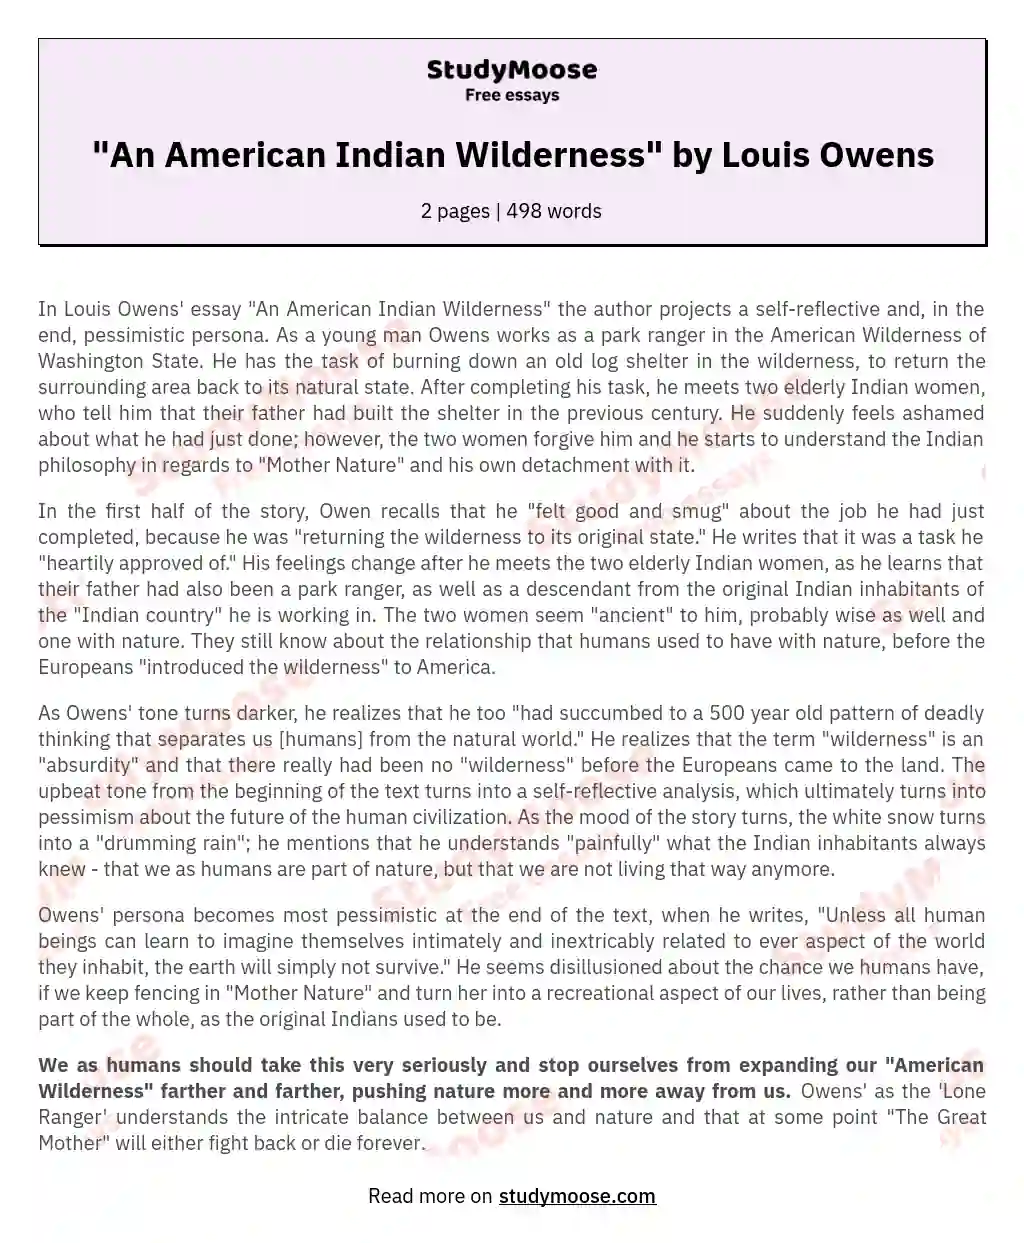 "An American Indian Wilderness" by Louis Owens